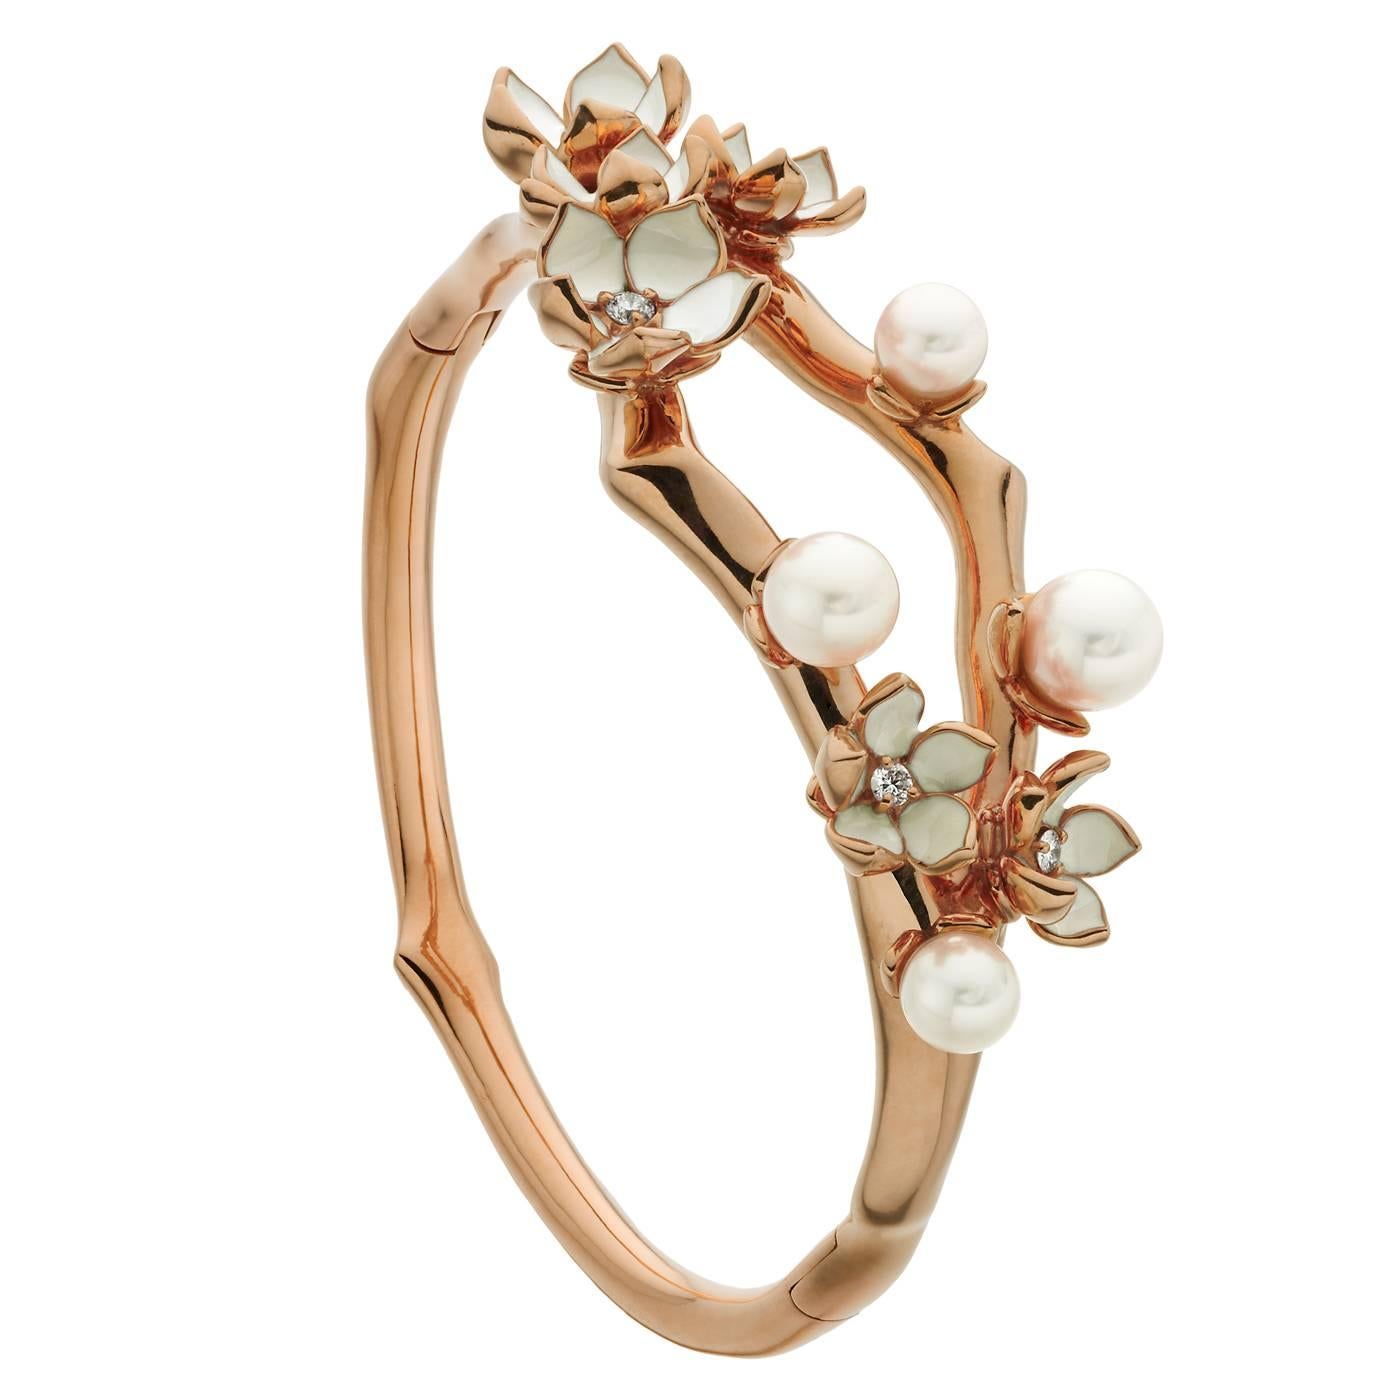 Shaun Leane Cherry Blossom Cuff in Rose Gold Vermeil with Diamonds